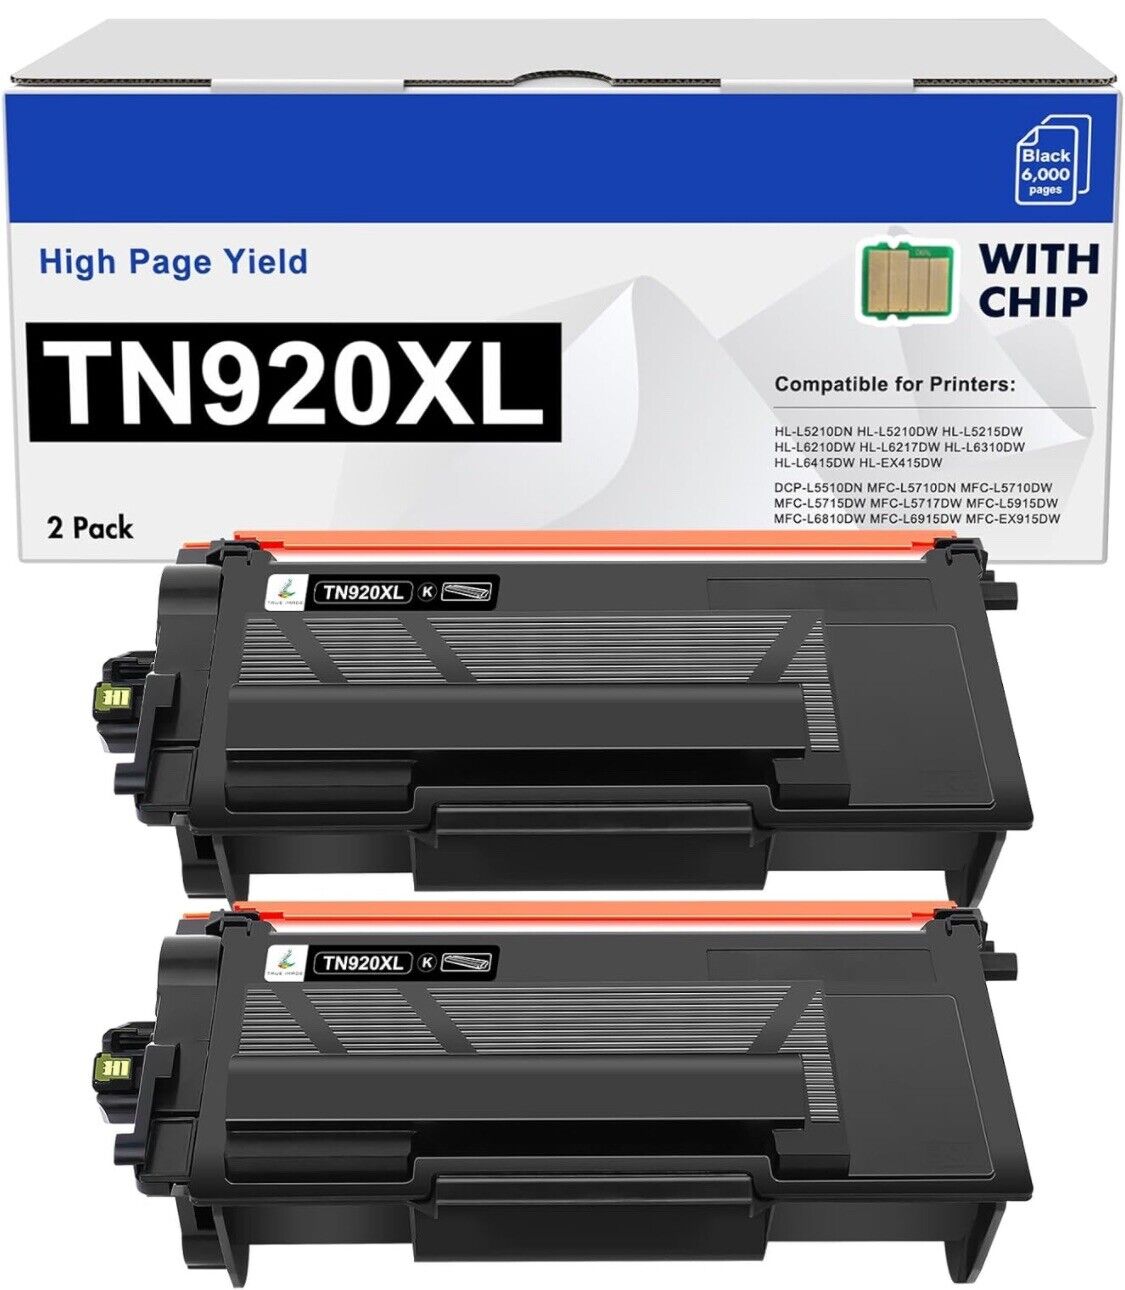 TN920XL TN920 Toner Cartridge Black: with Chip Compatible for Brother